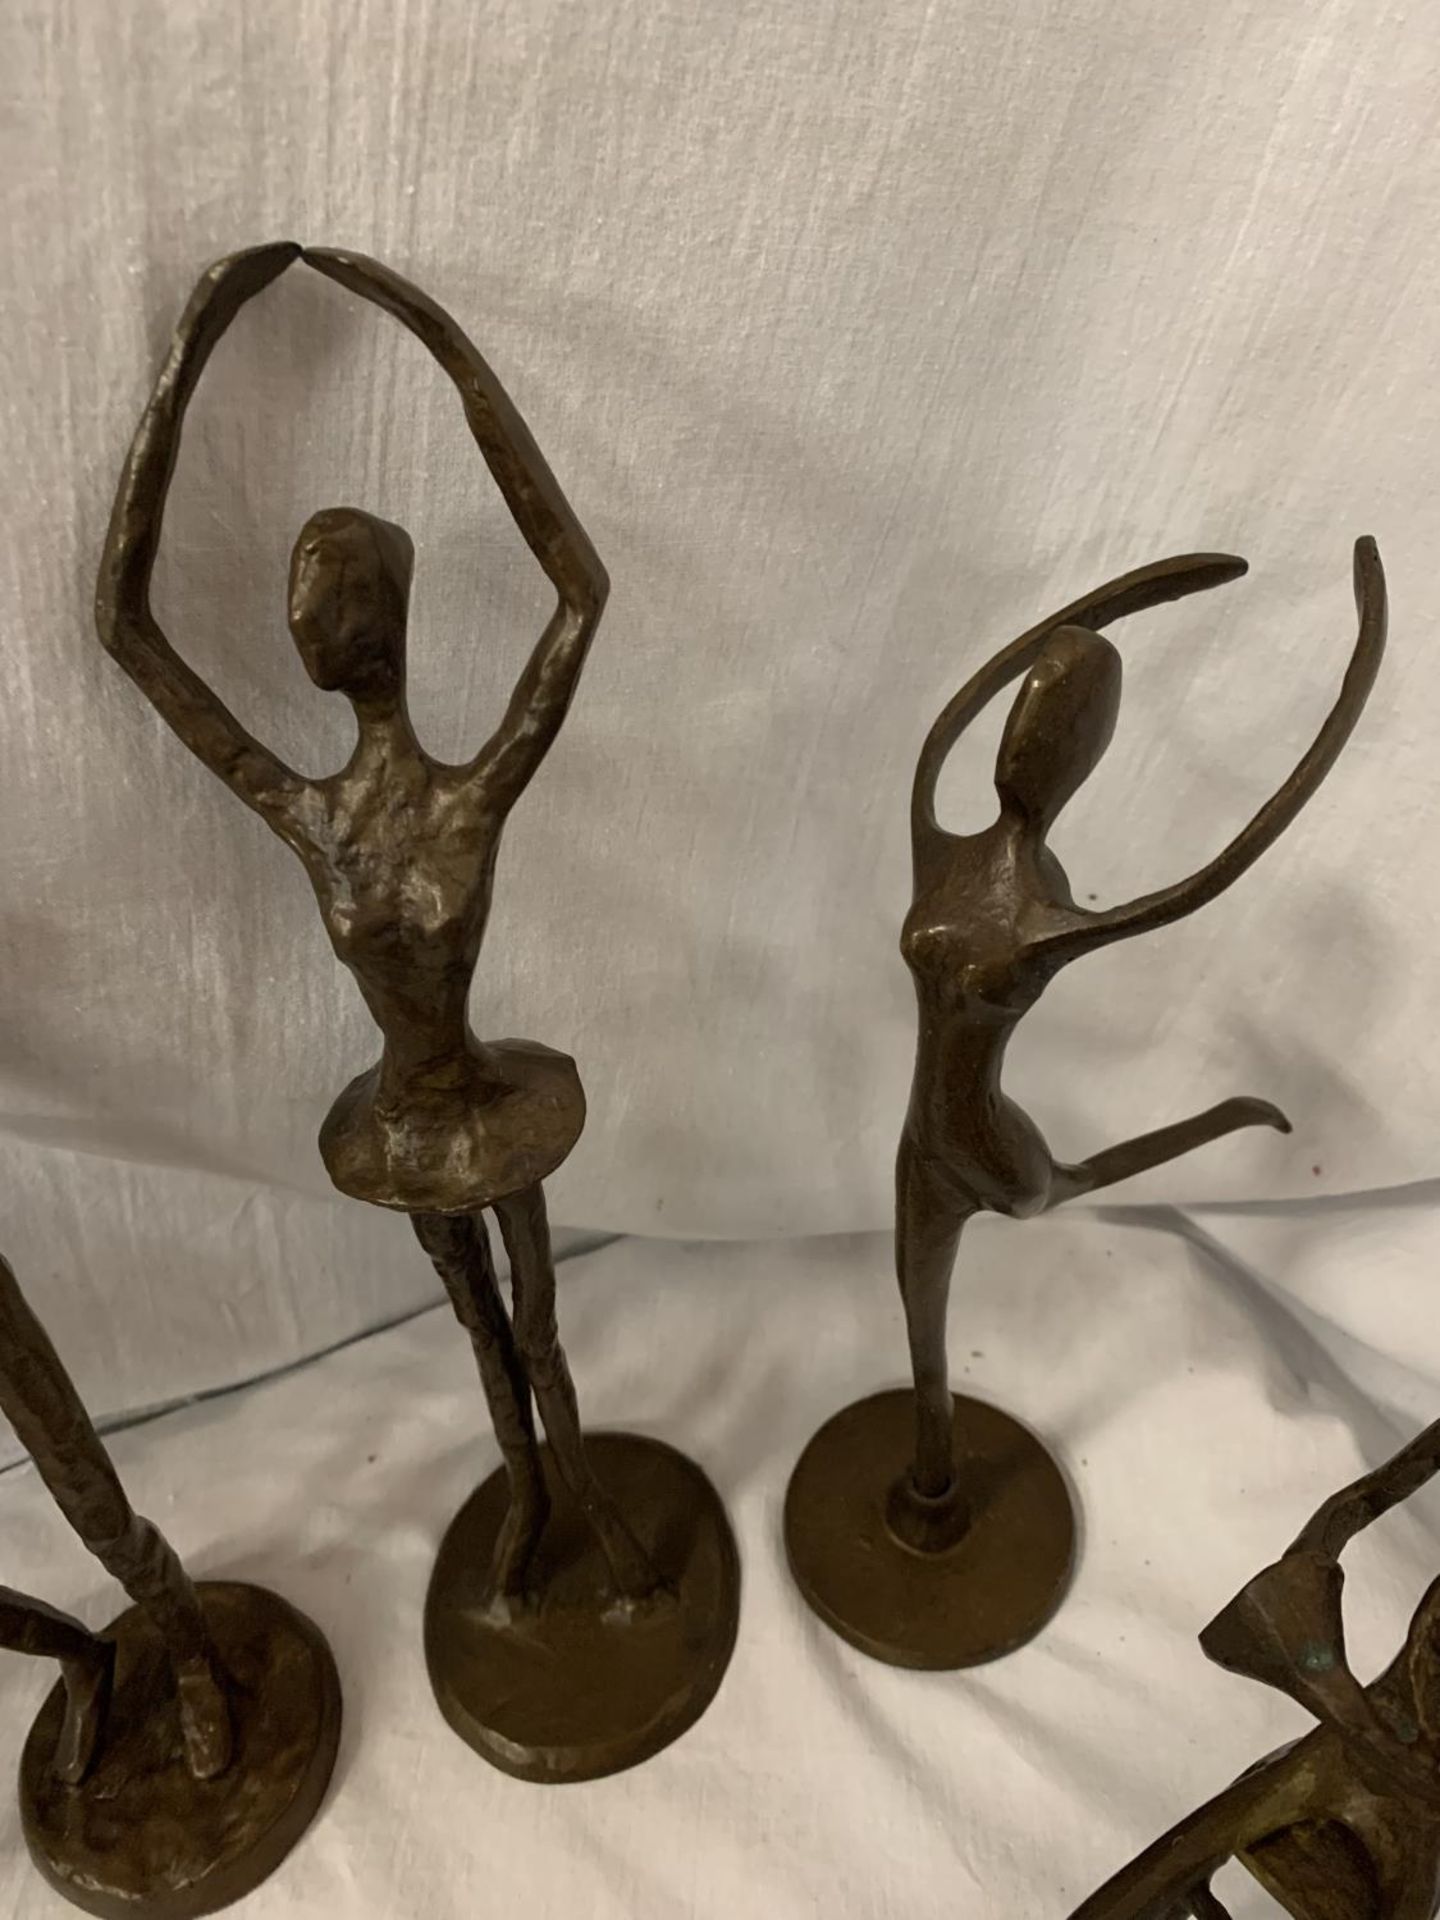 A GROUP OF TEN BRONZE FIGURINES IN THE ABSTRACT FORM - Image 5 of 6